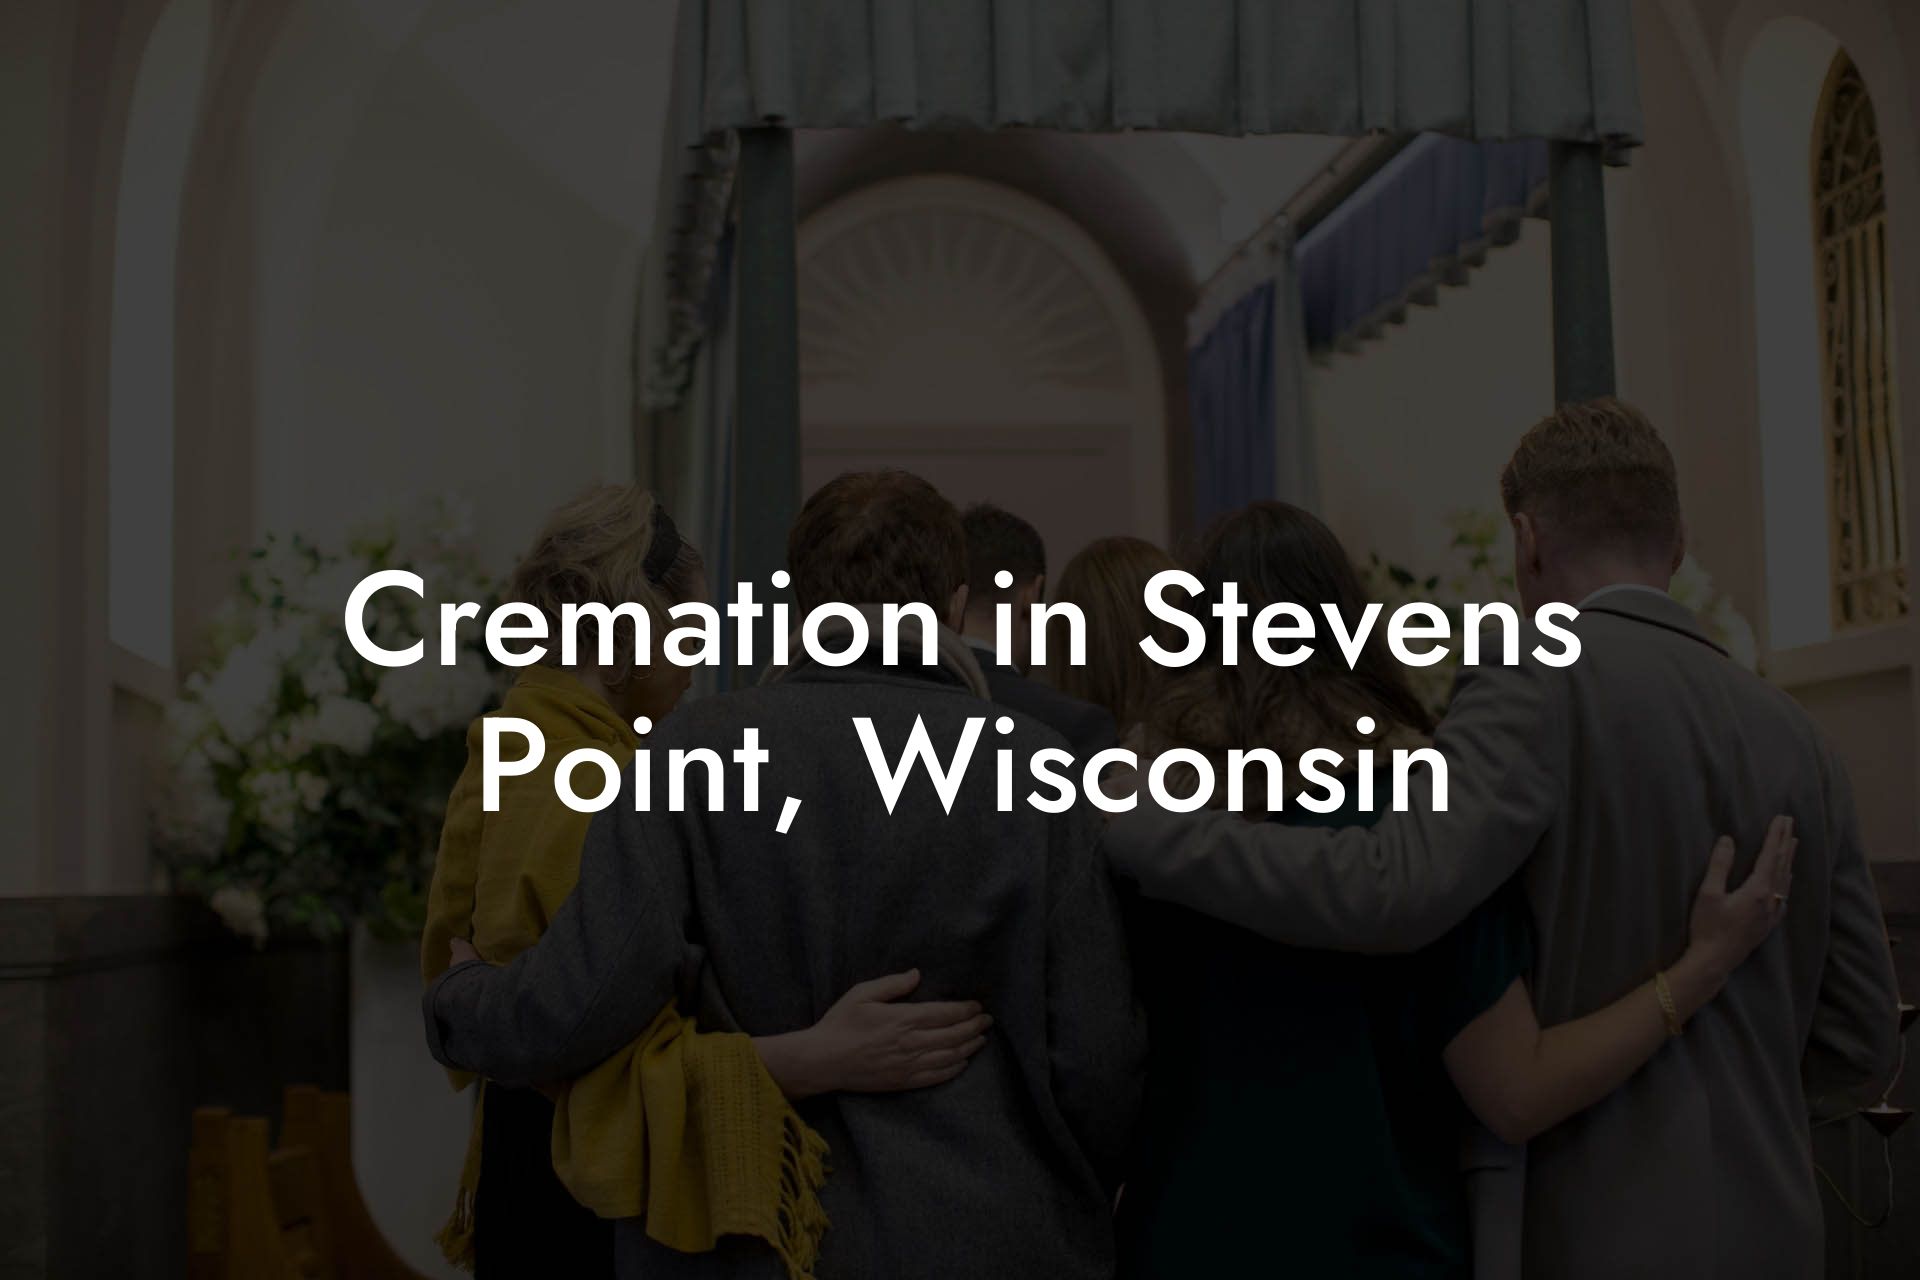 Cremation in Stevens Point, Wisconsin